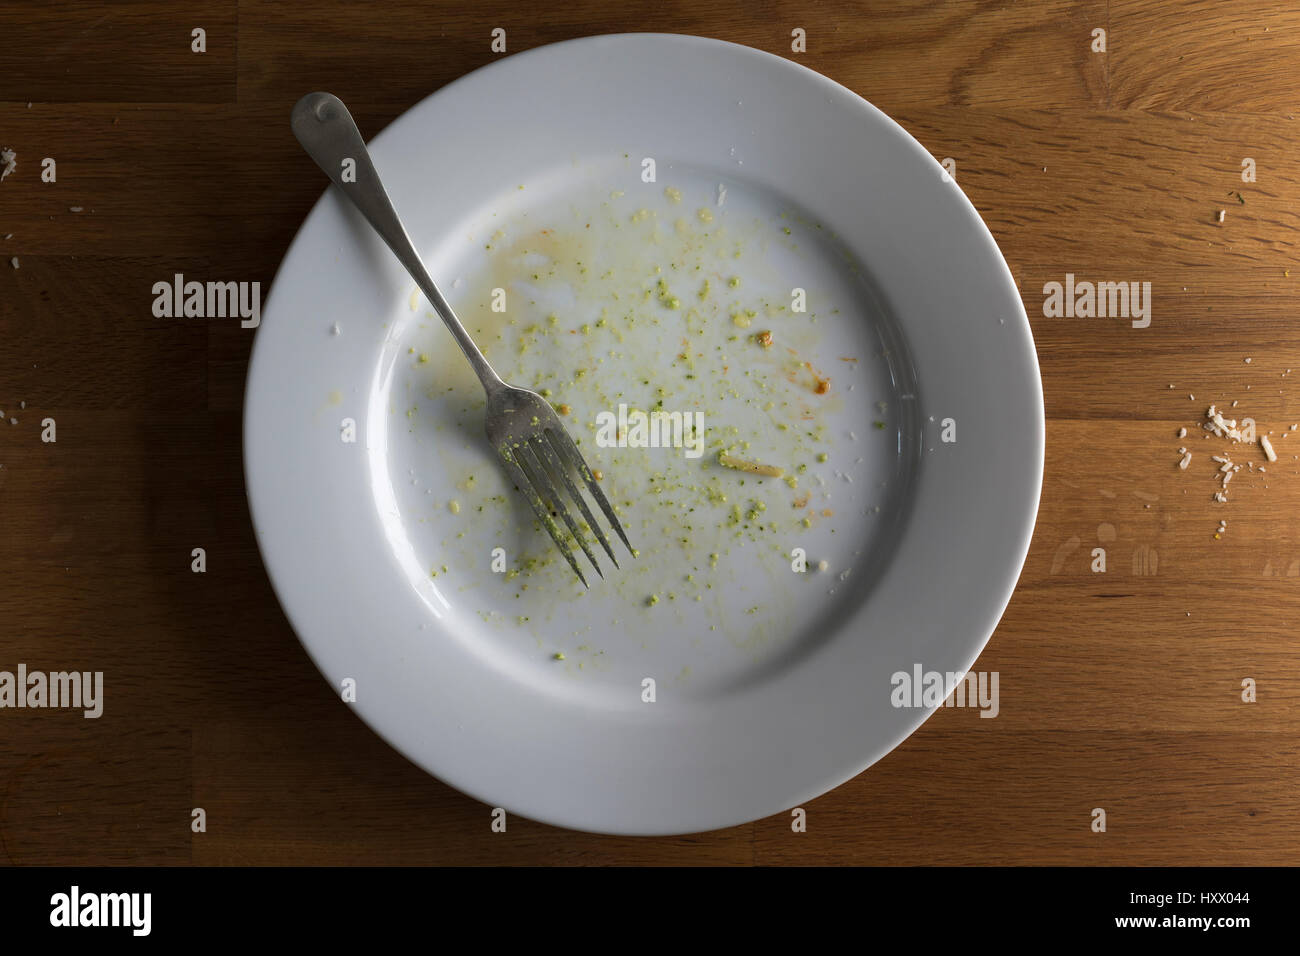 Ariel view of a plate after a meal has been clearly enjoyed and finished. Stock Photo